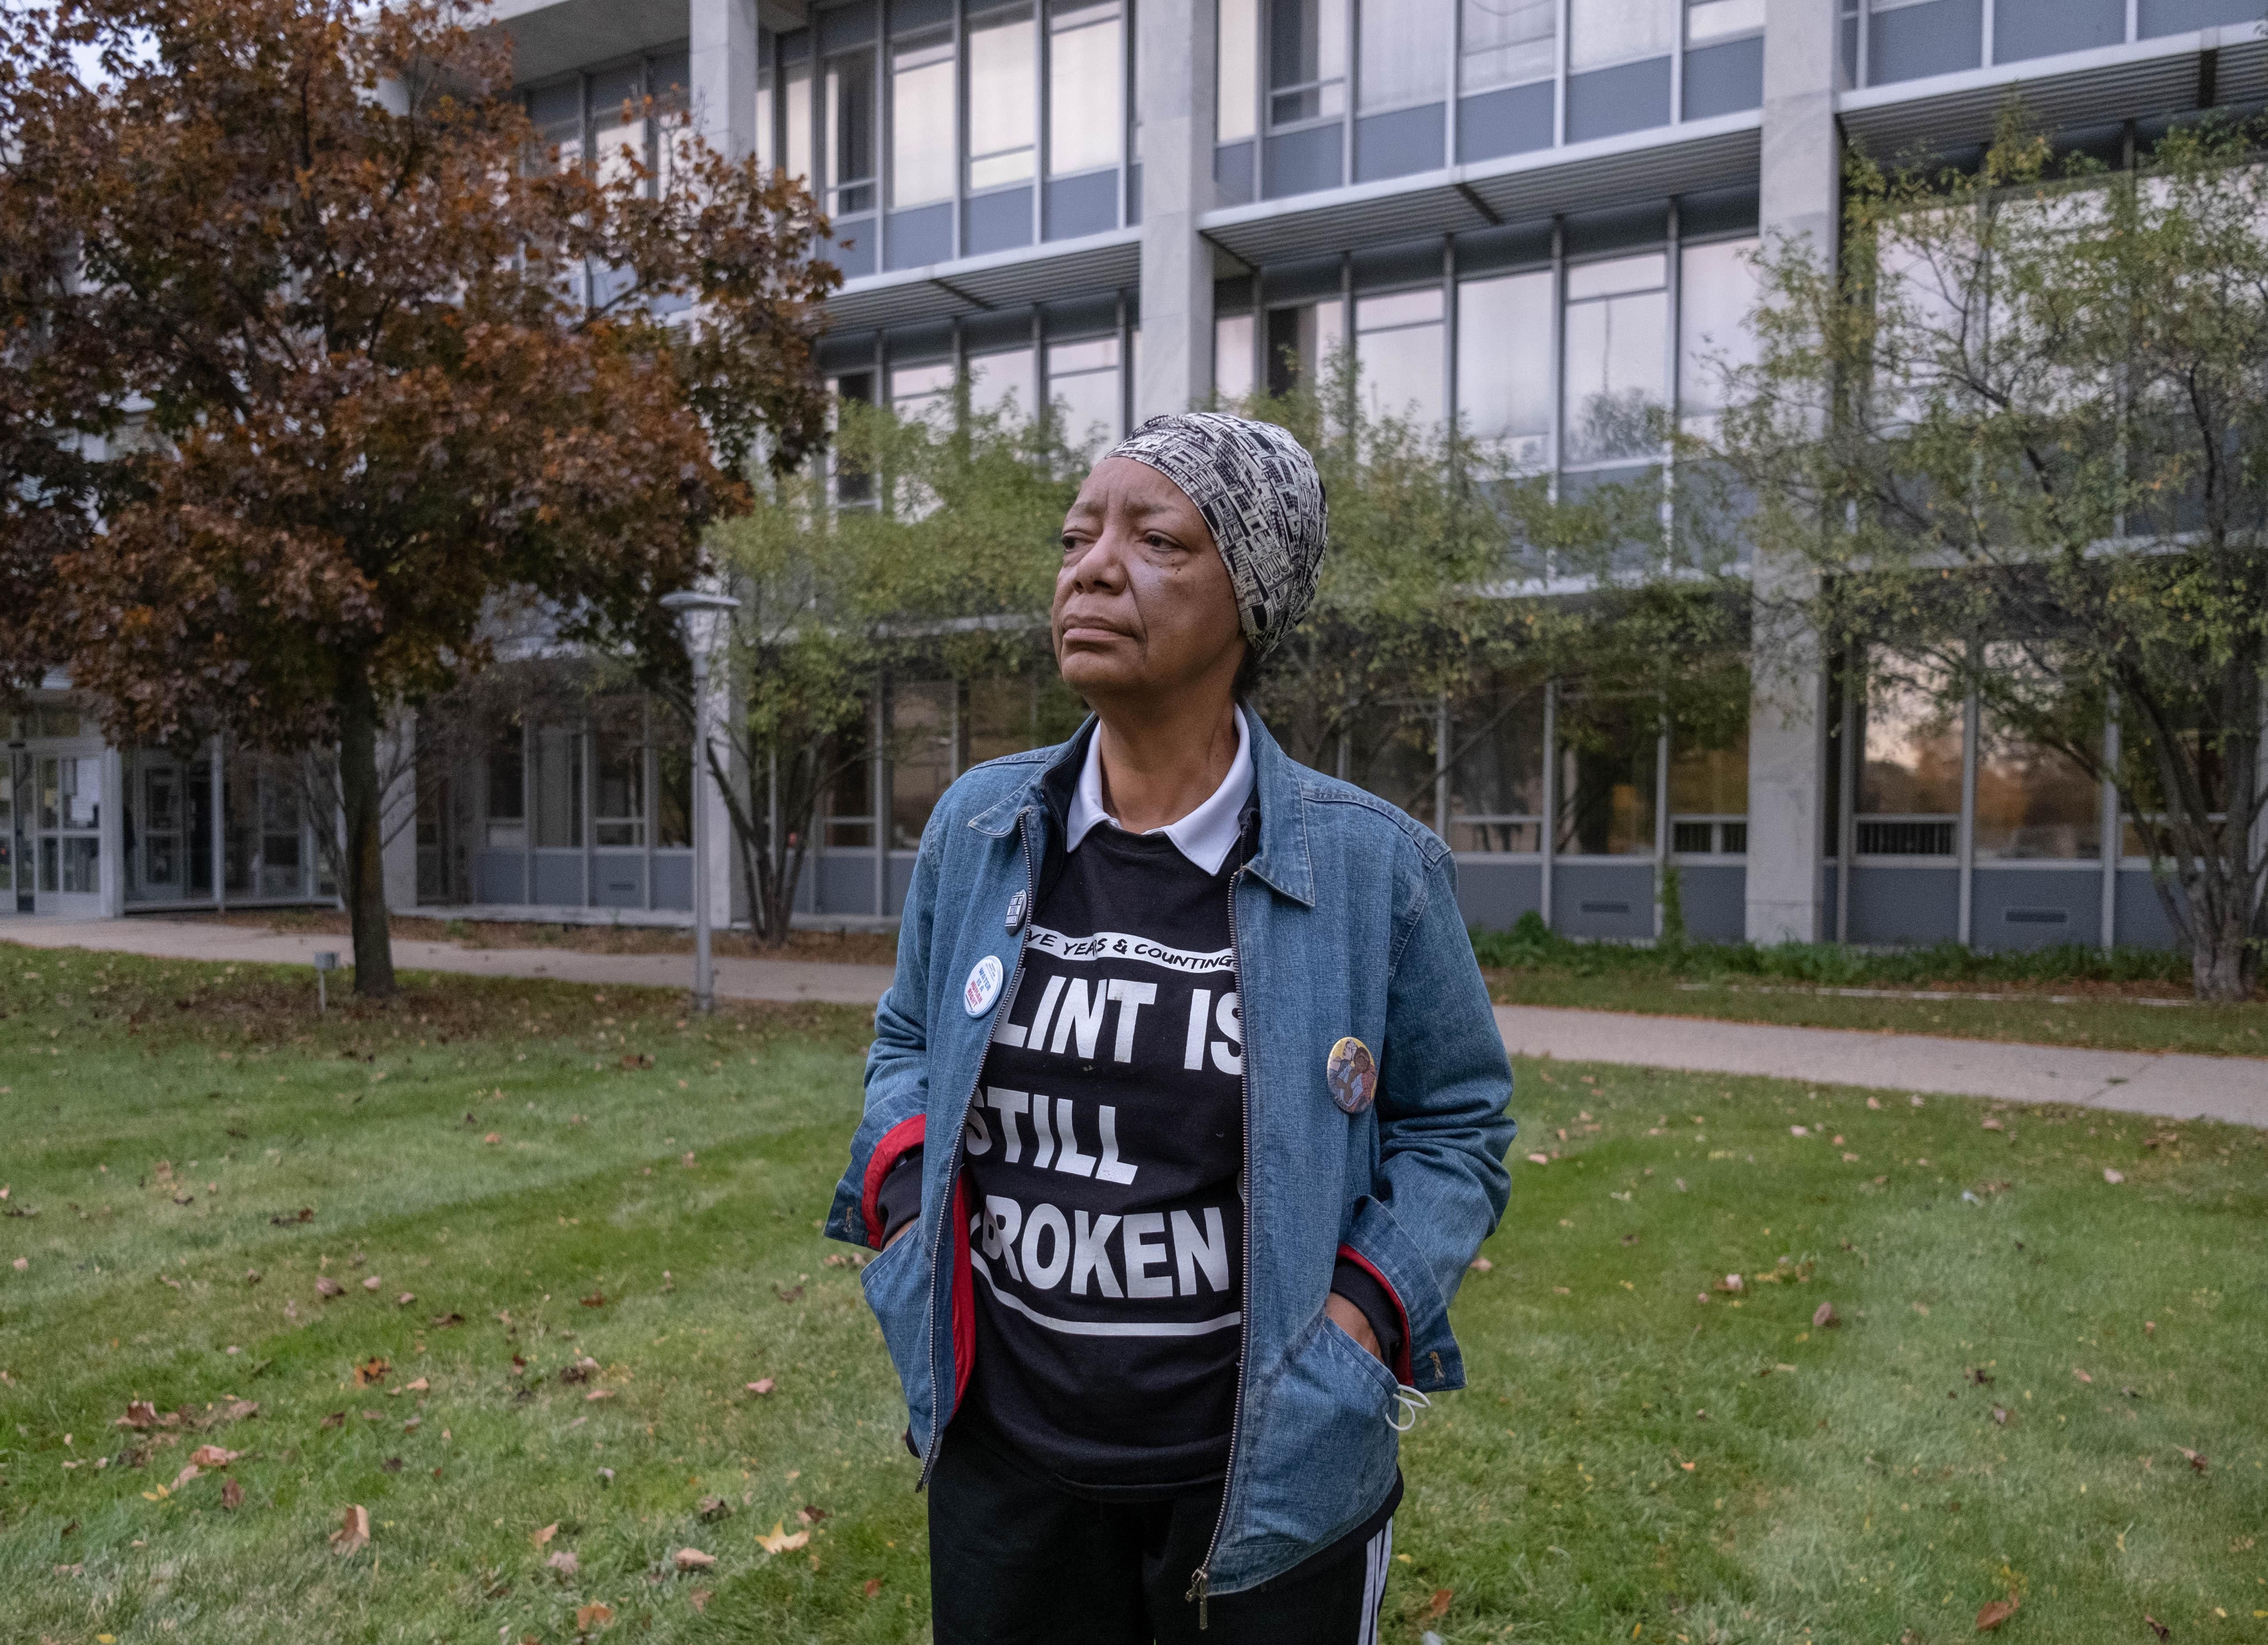 Activist Claire McClinton stands for a portrait outside of City Hall in Flint, Michigan on October 20, 2020